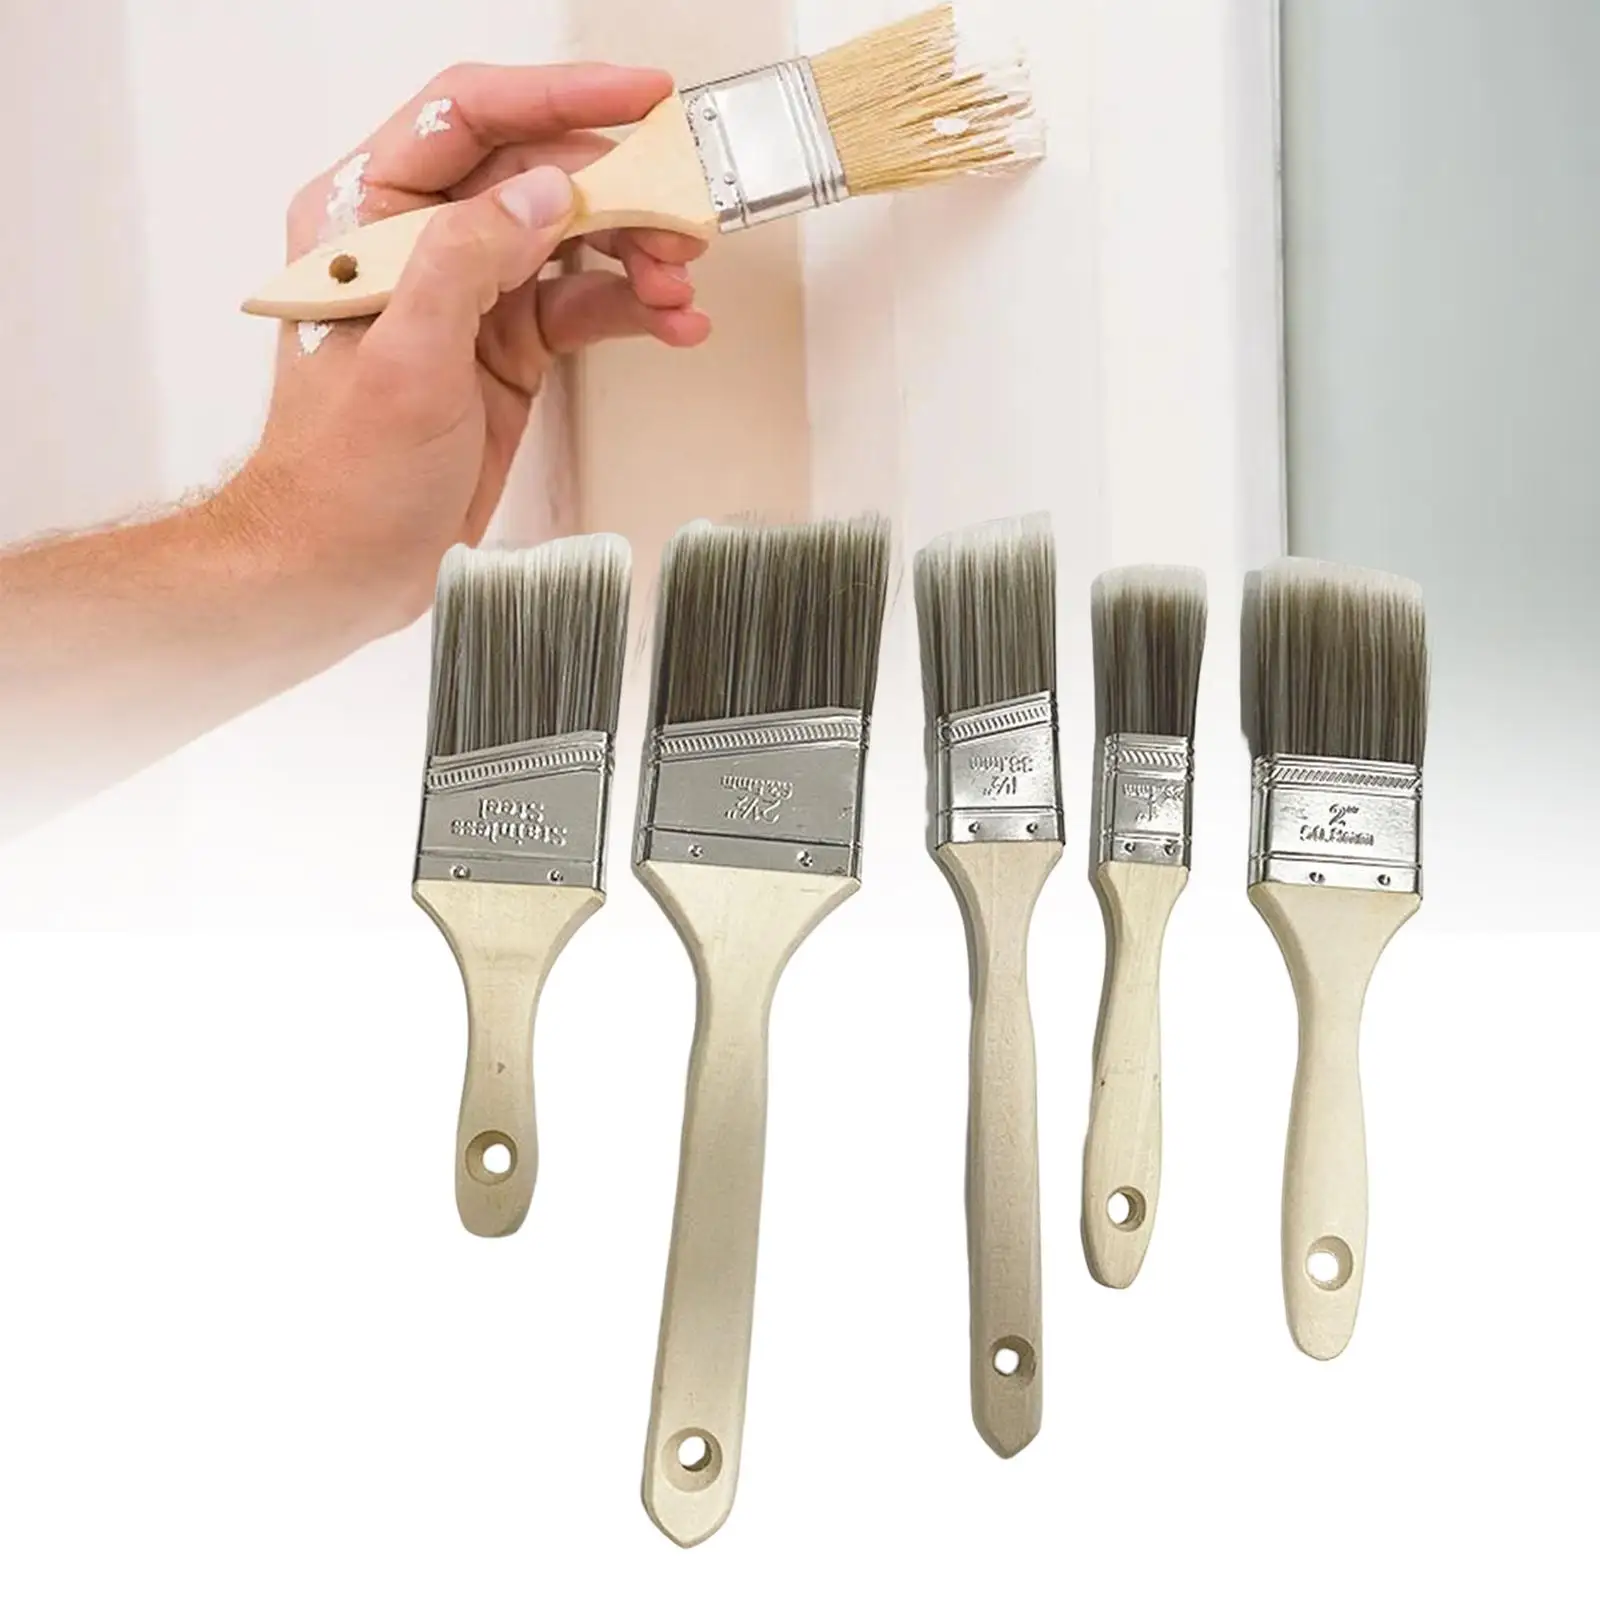 5x Wall Paint Brushes Professional for Home Renovations Bathrooms Baseboards